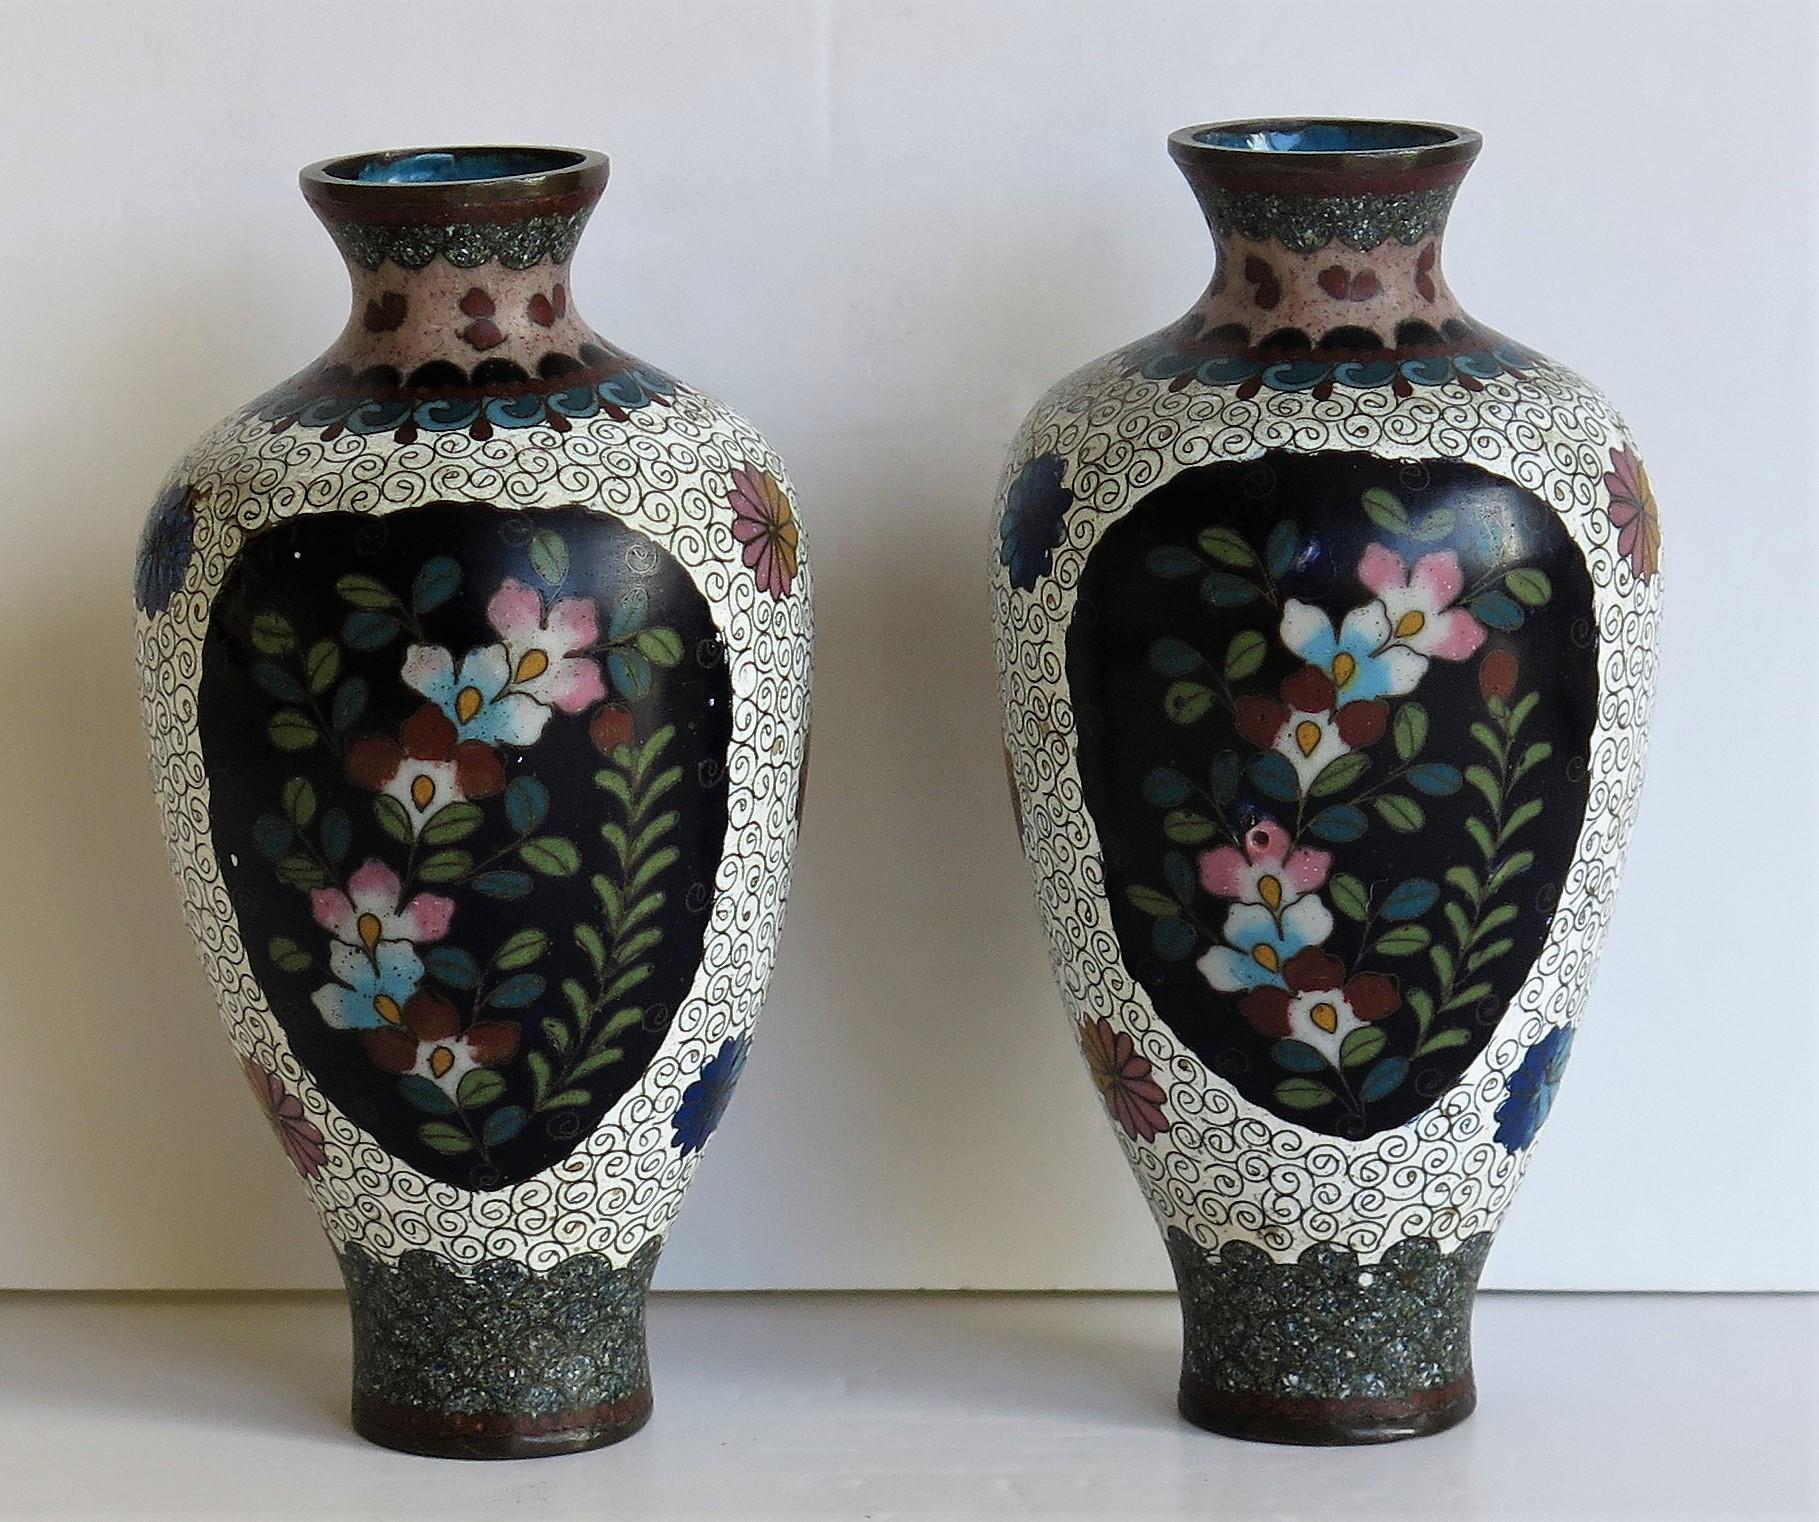 These are a very decorative pair of cloisonné vases, made in Japan and dating to the 19th Meiji Period, circa 1875.

The vases have a good baluster shape with a circular form. They have been well made of a bronze alloy with rich enamels of many